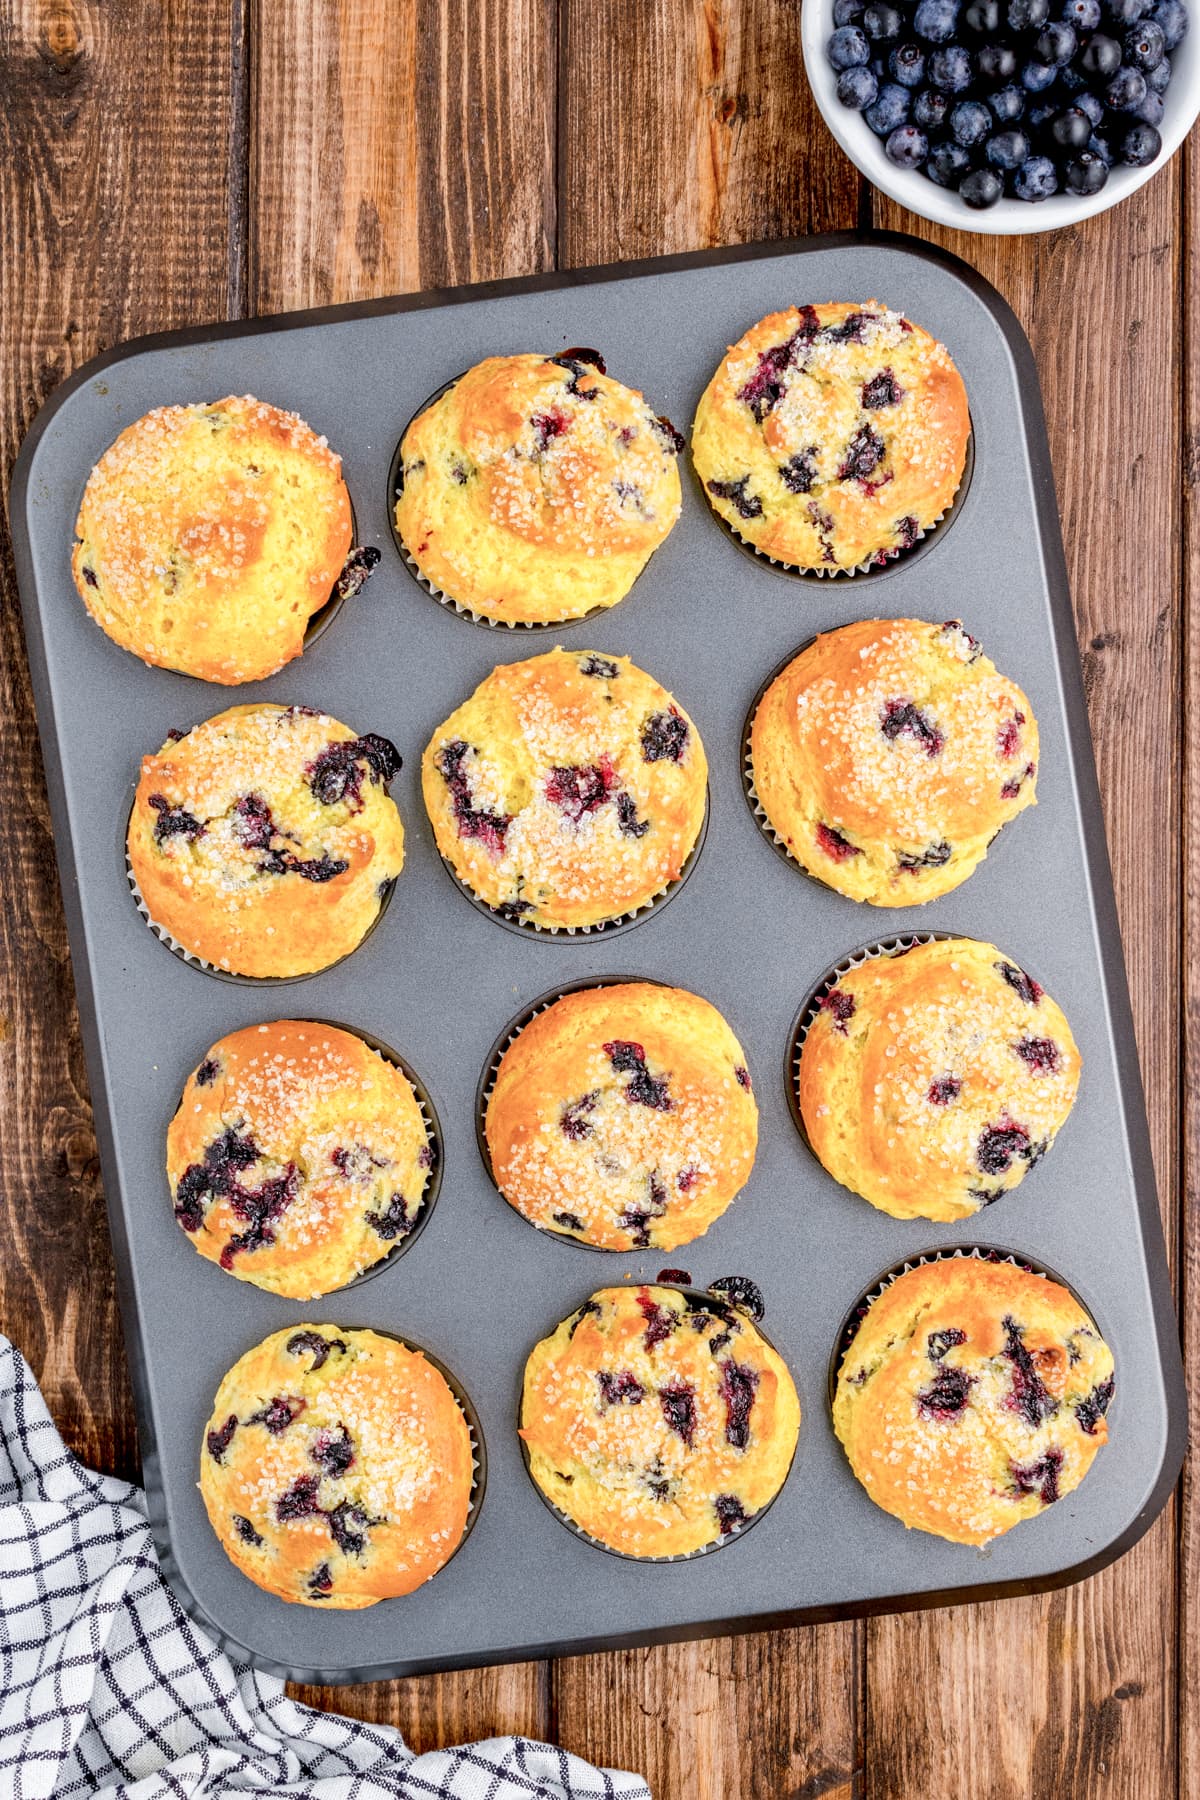 Freshly baked lemon-blueberry muffins cooling on a wire rack, with a golden-brown top and sparkling sugar glisten.